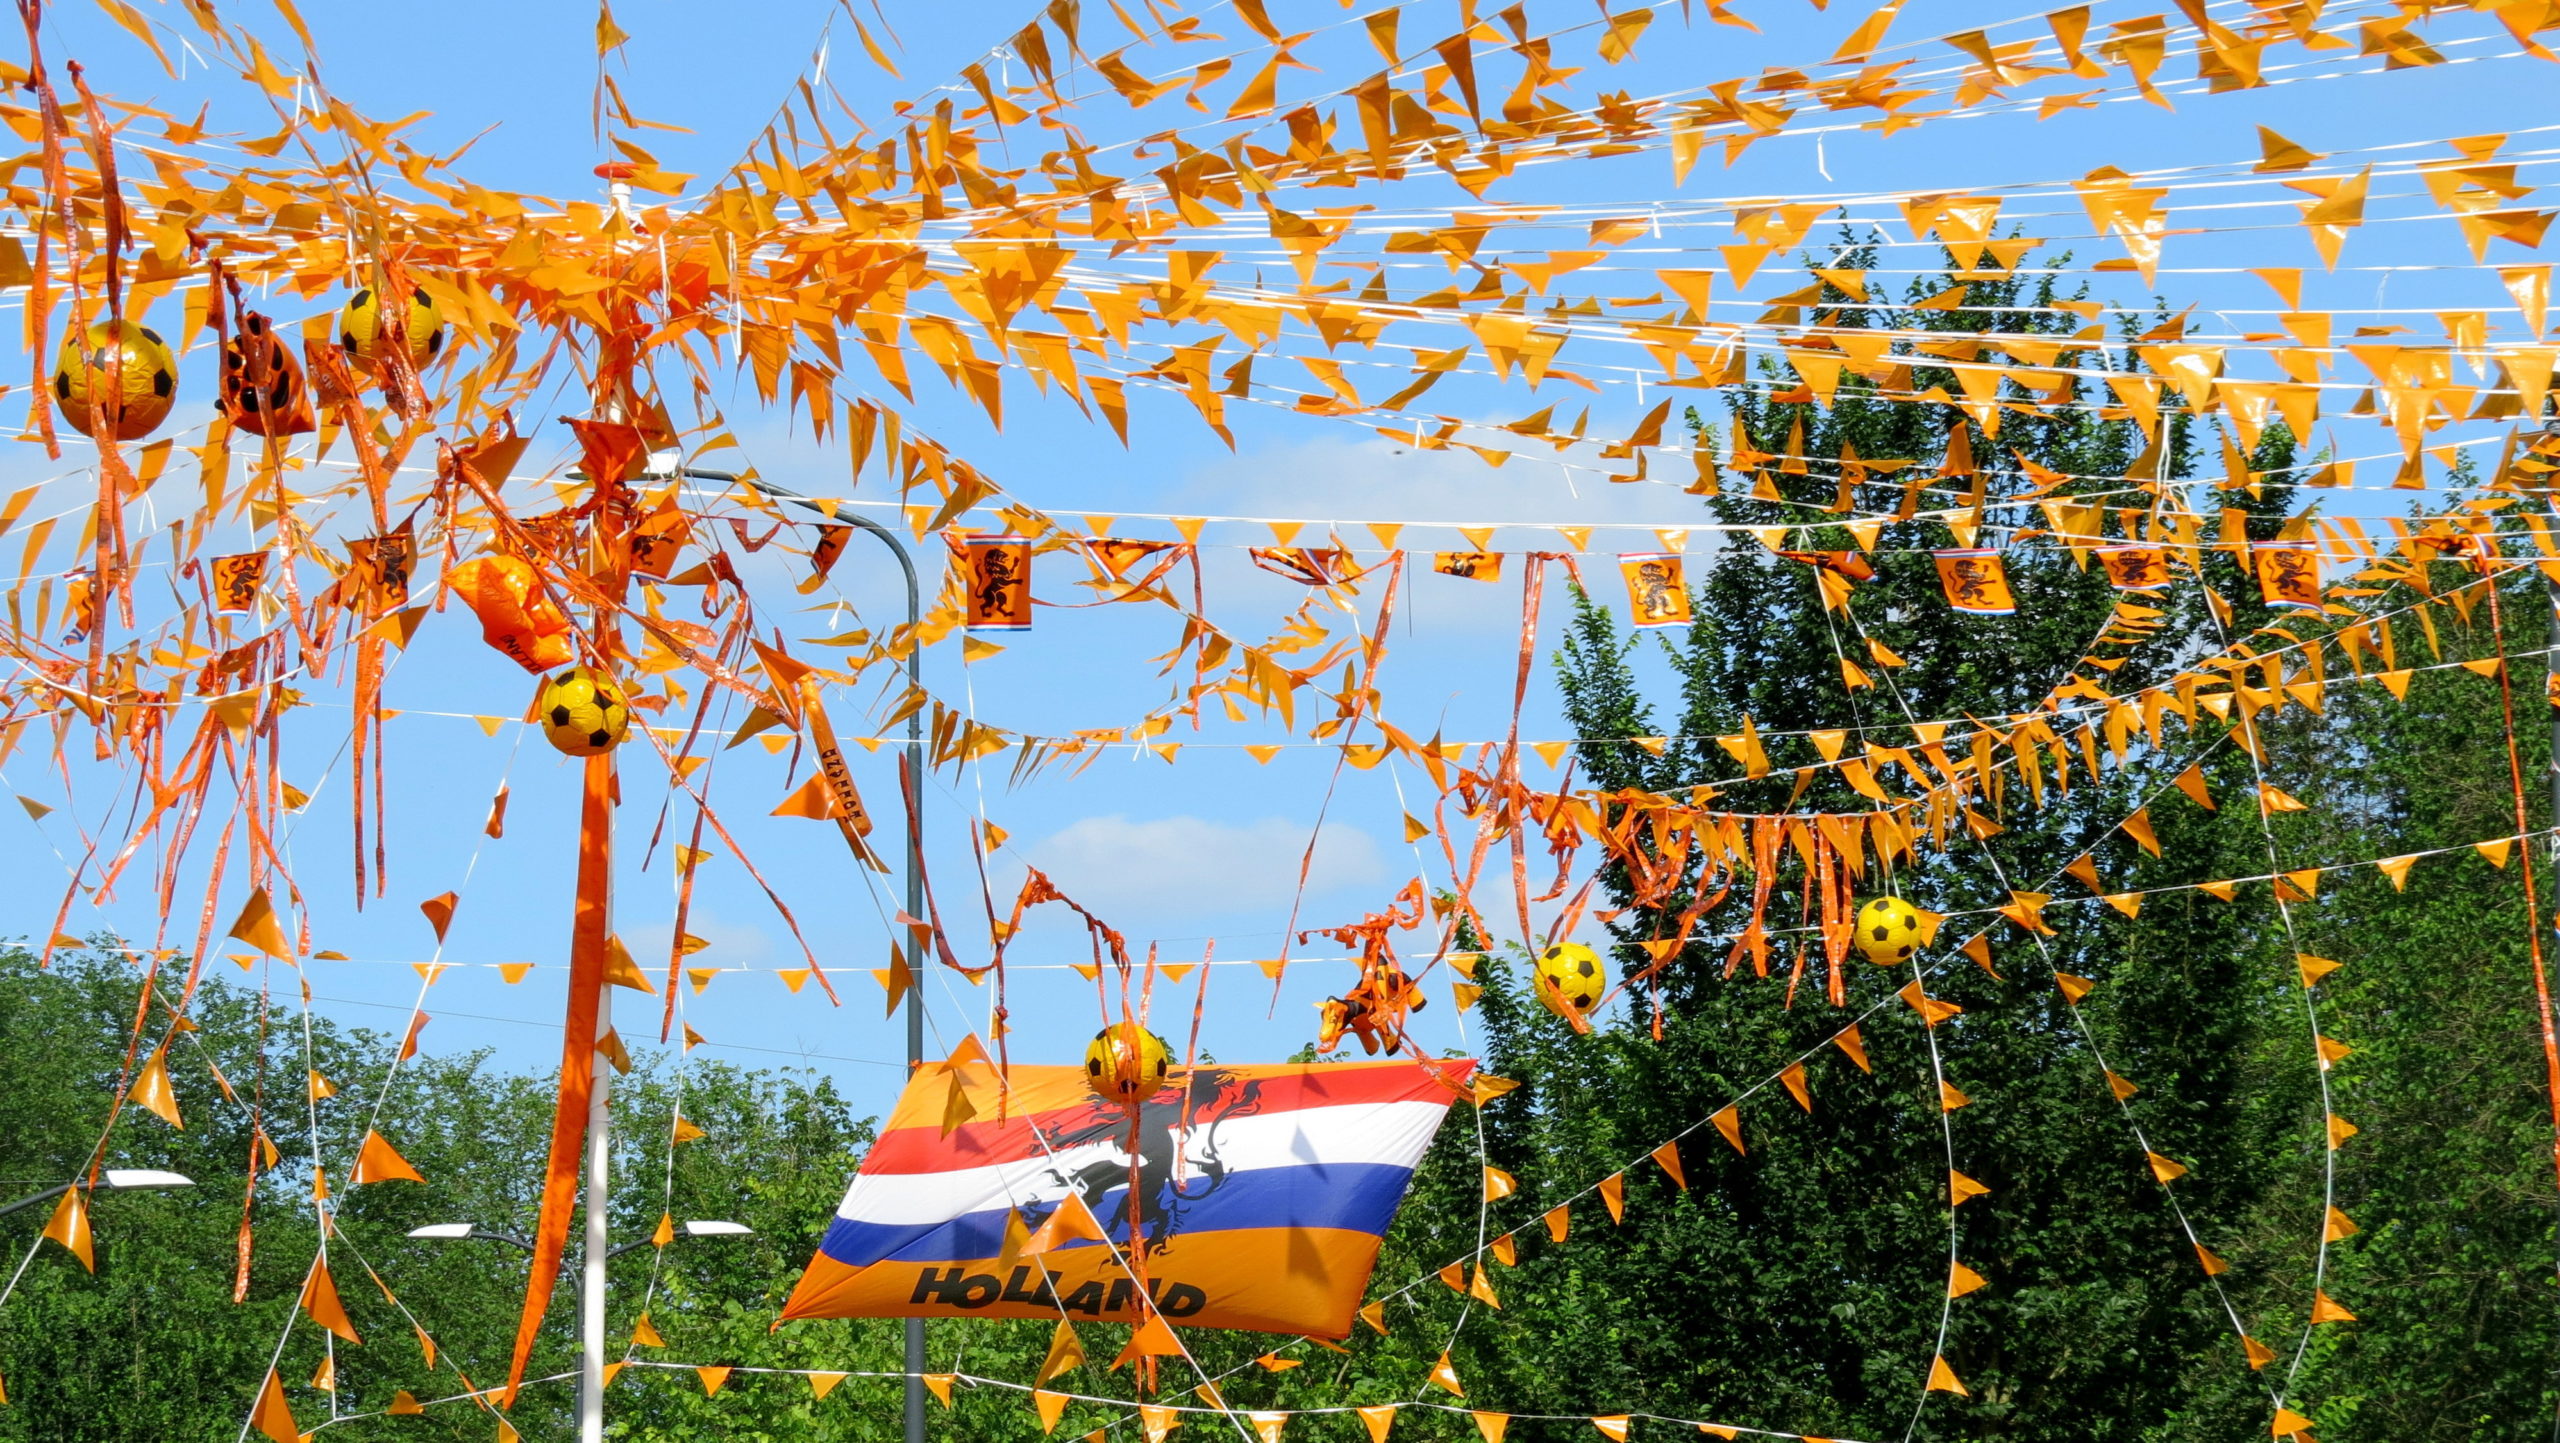 Weather of the Netherlands vs Romania match in the final of the eighth European Championship